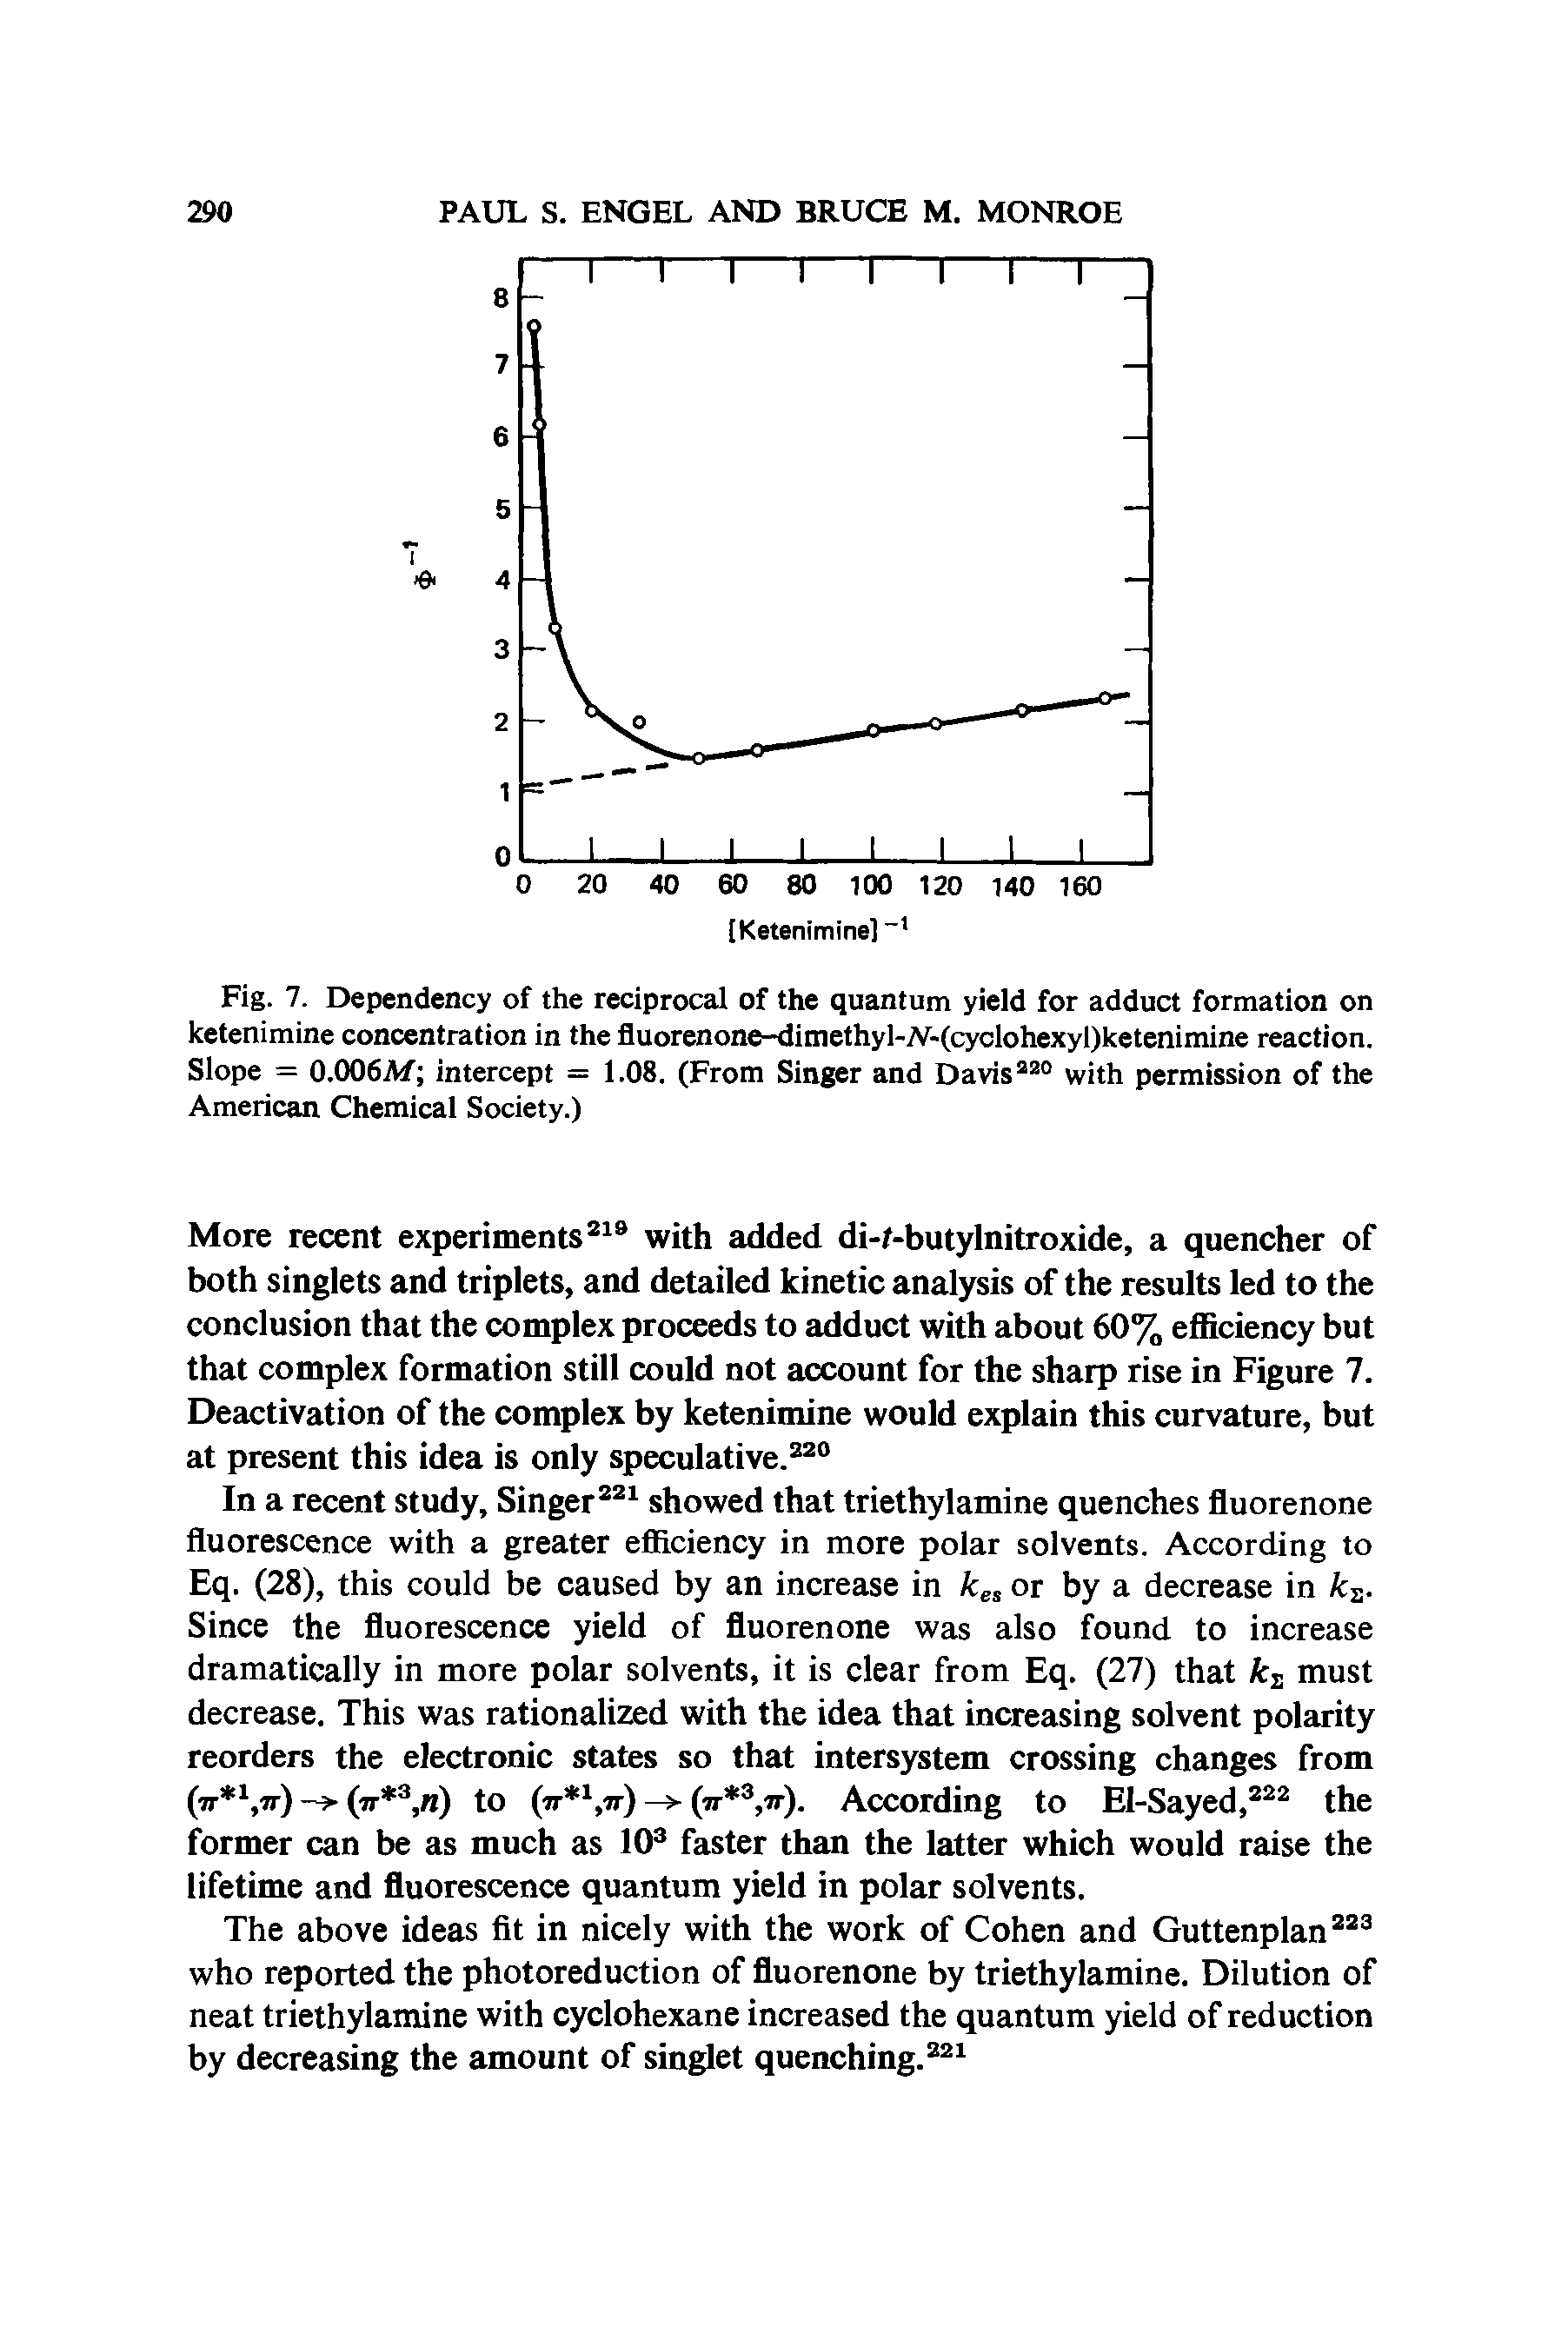 Fig. 7. Dependency of the reciprocal of the quantum yield for adduct formation on ketenimine concentration in the fluorenone-dimethyl-iV-(cyclohexyl)ketenimine reaction. Slope = 0.006M intercept = 1.08. (From Singer and Davis220 with permission of the American Chemical Society.)...